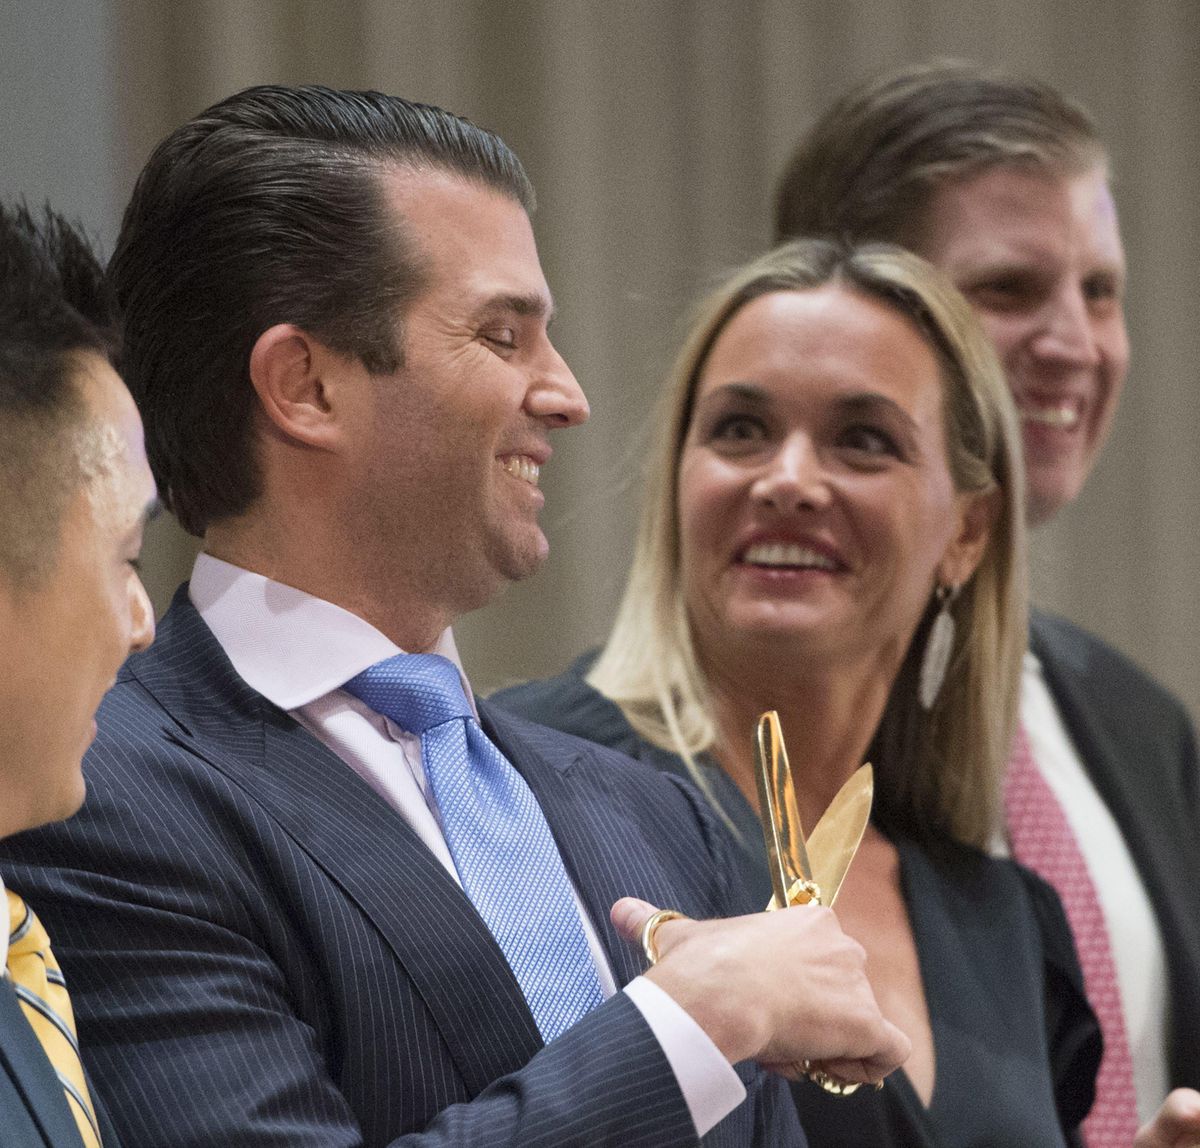 In this Feb. 28, 2017 file photo, Donald Trump Jr. jokingly plays with scissors as his wife Vanessa laughs at the grand opening of the Trump International Hotel and Tower in Vancouver, Canada. A public court record filed Thursday, March 15, 2018 in New York says Vanessa Trump is seeking an uncontested divorce from the president’s son. Details of the divorce complaint haven’t been made public. (Jonathan Hayward / Associated Press)